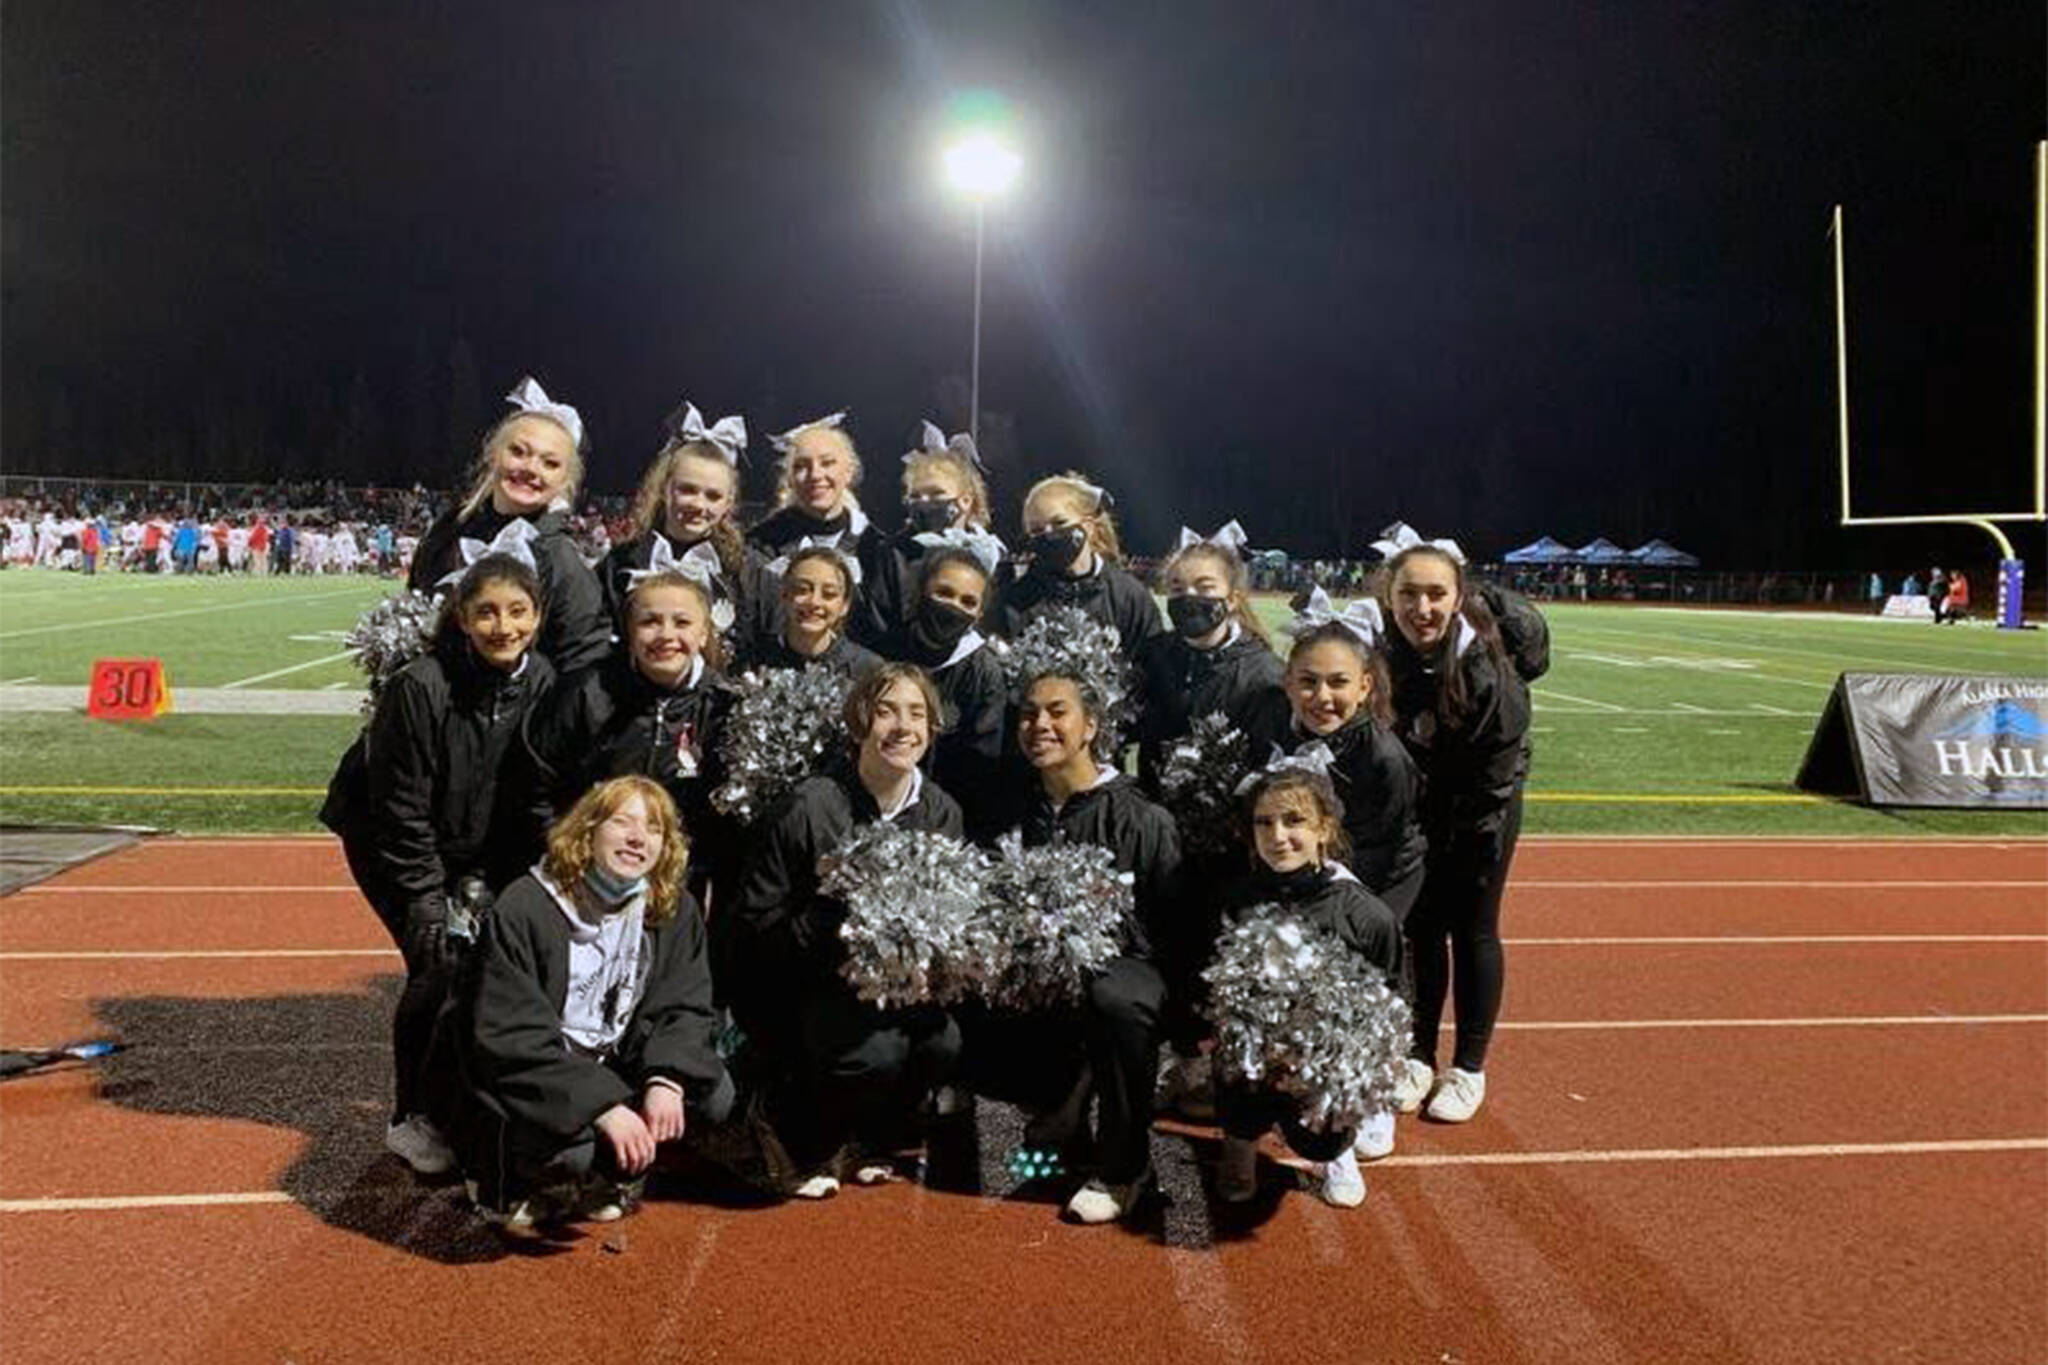 Juneau’s unified football cheerleaders supported the football team Friday night in Anchorage and picked up a slew of awards, including “Grand Master Champs” at Saturday's "Rally in the Valley" cheer competition at Colony High School in Palmer. (Courtesy photo/Carlene Nore)